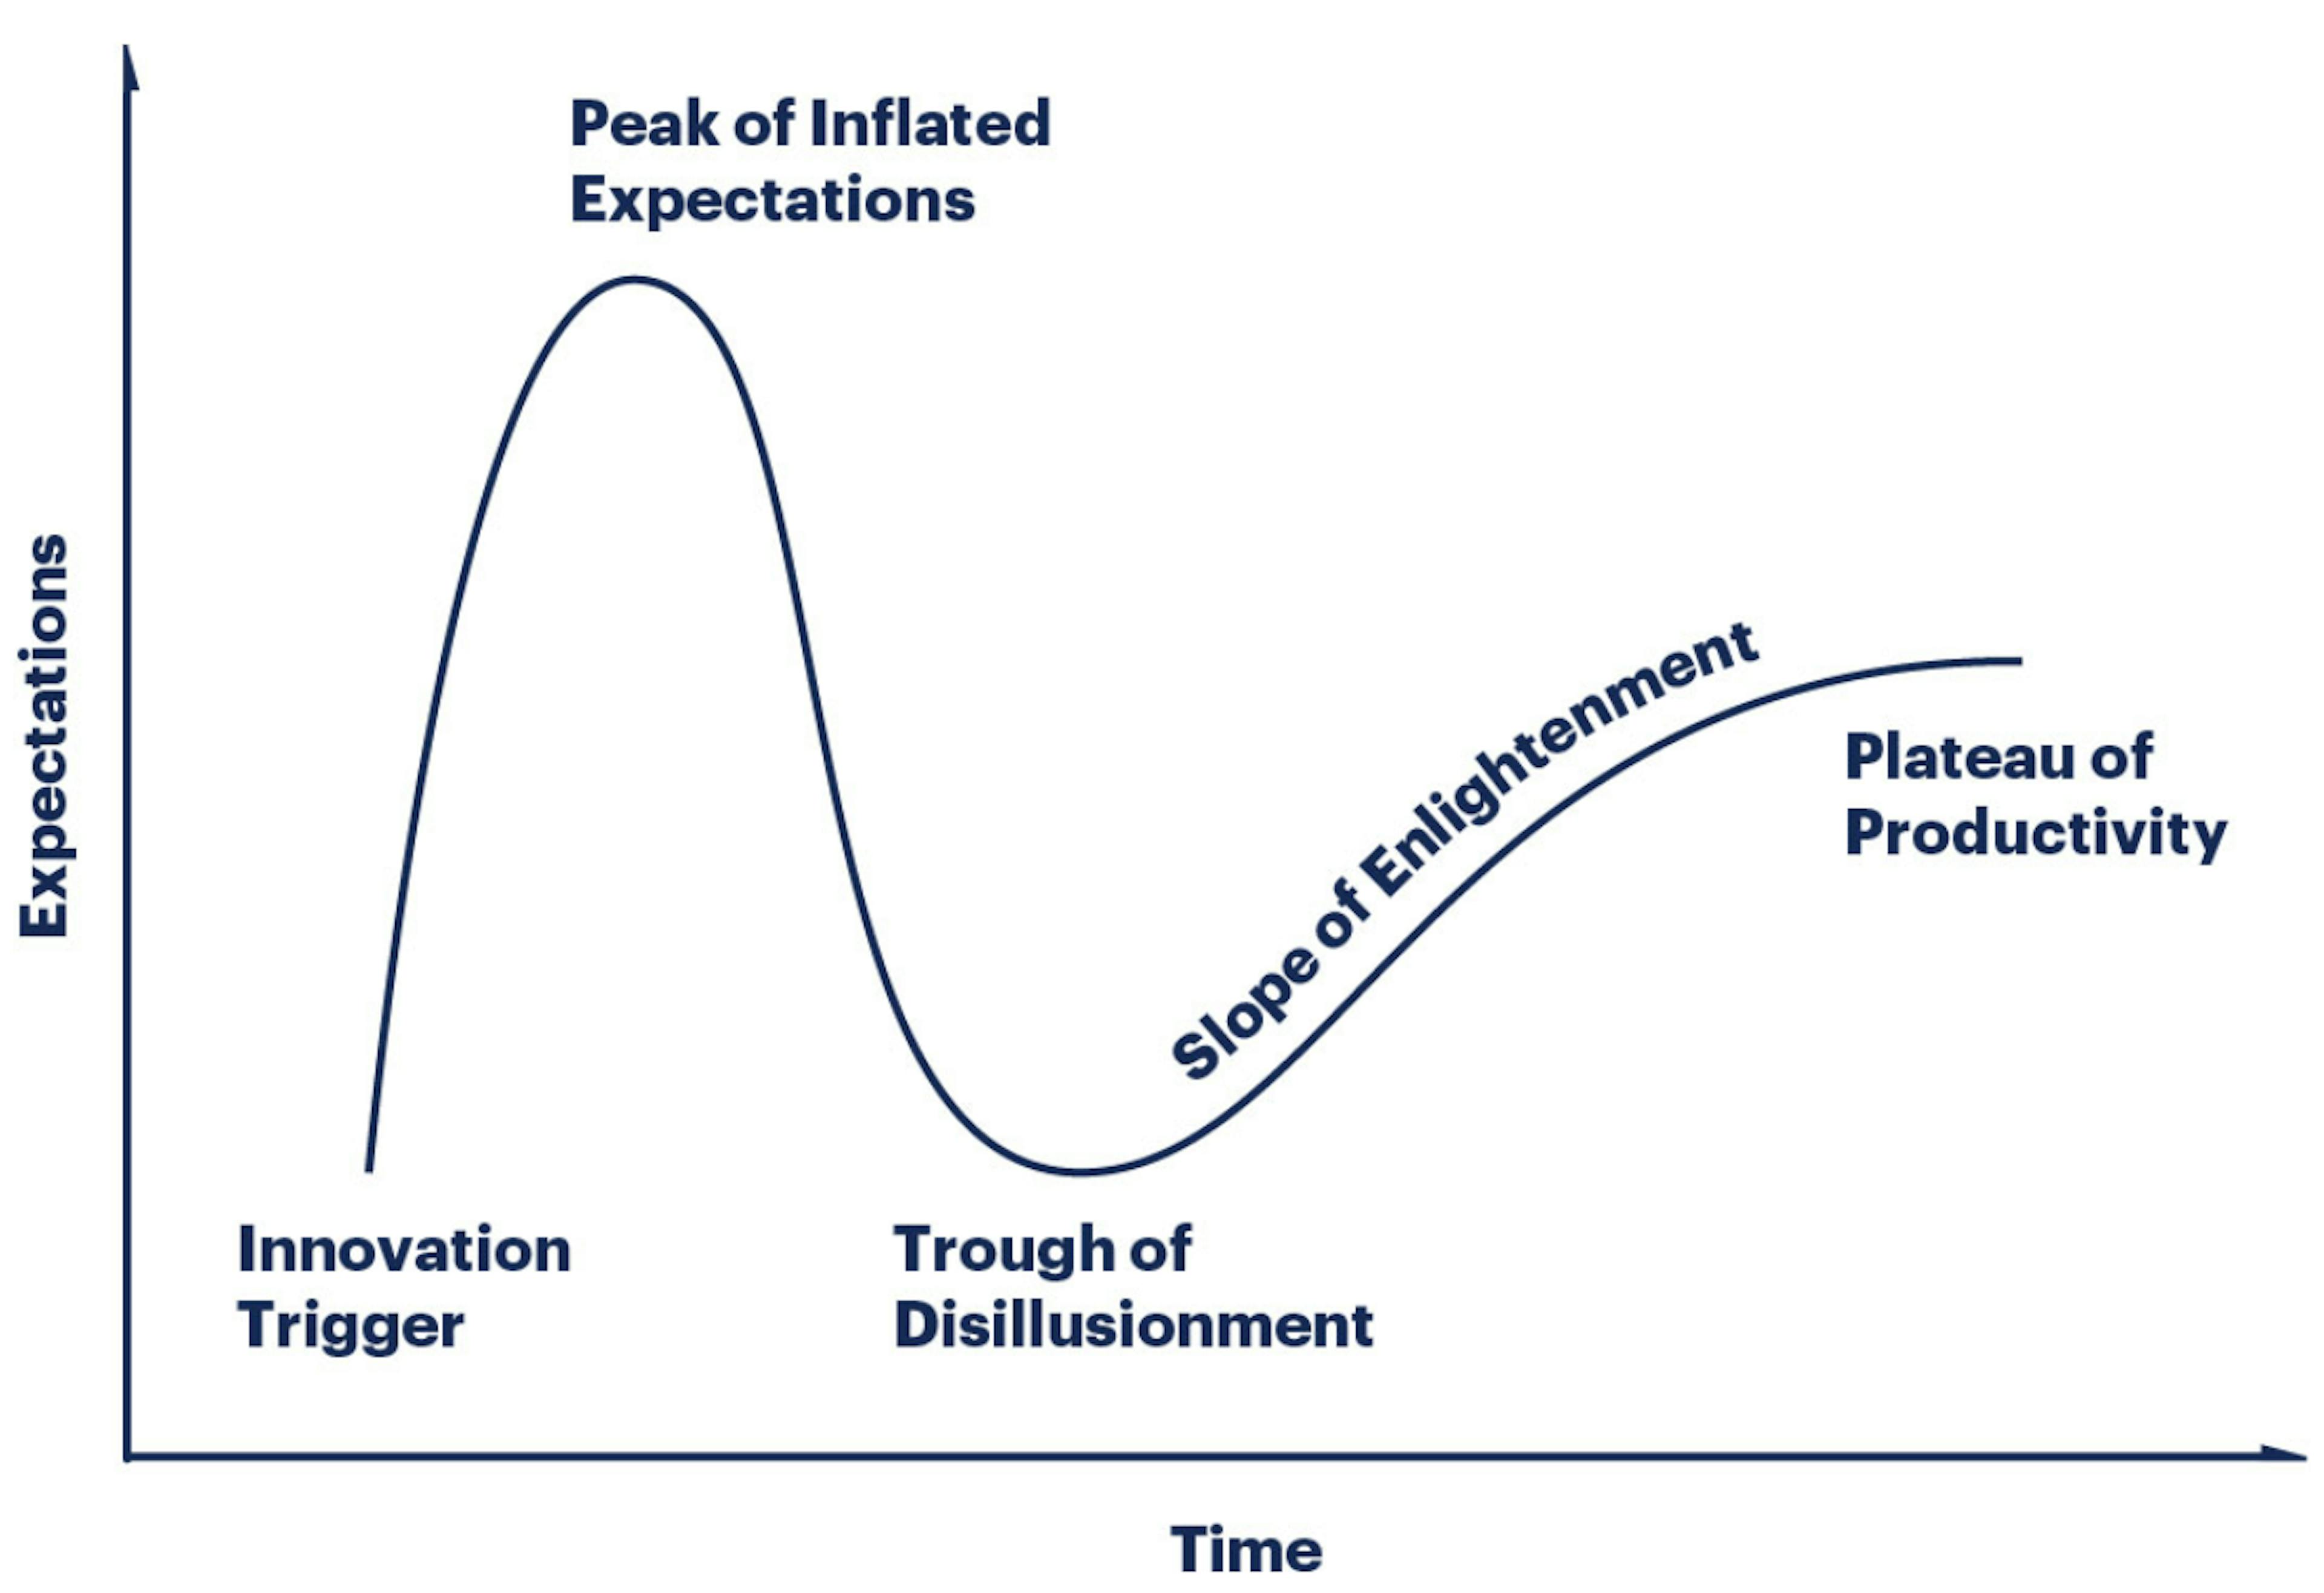 The hype cycle